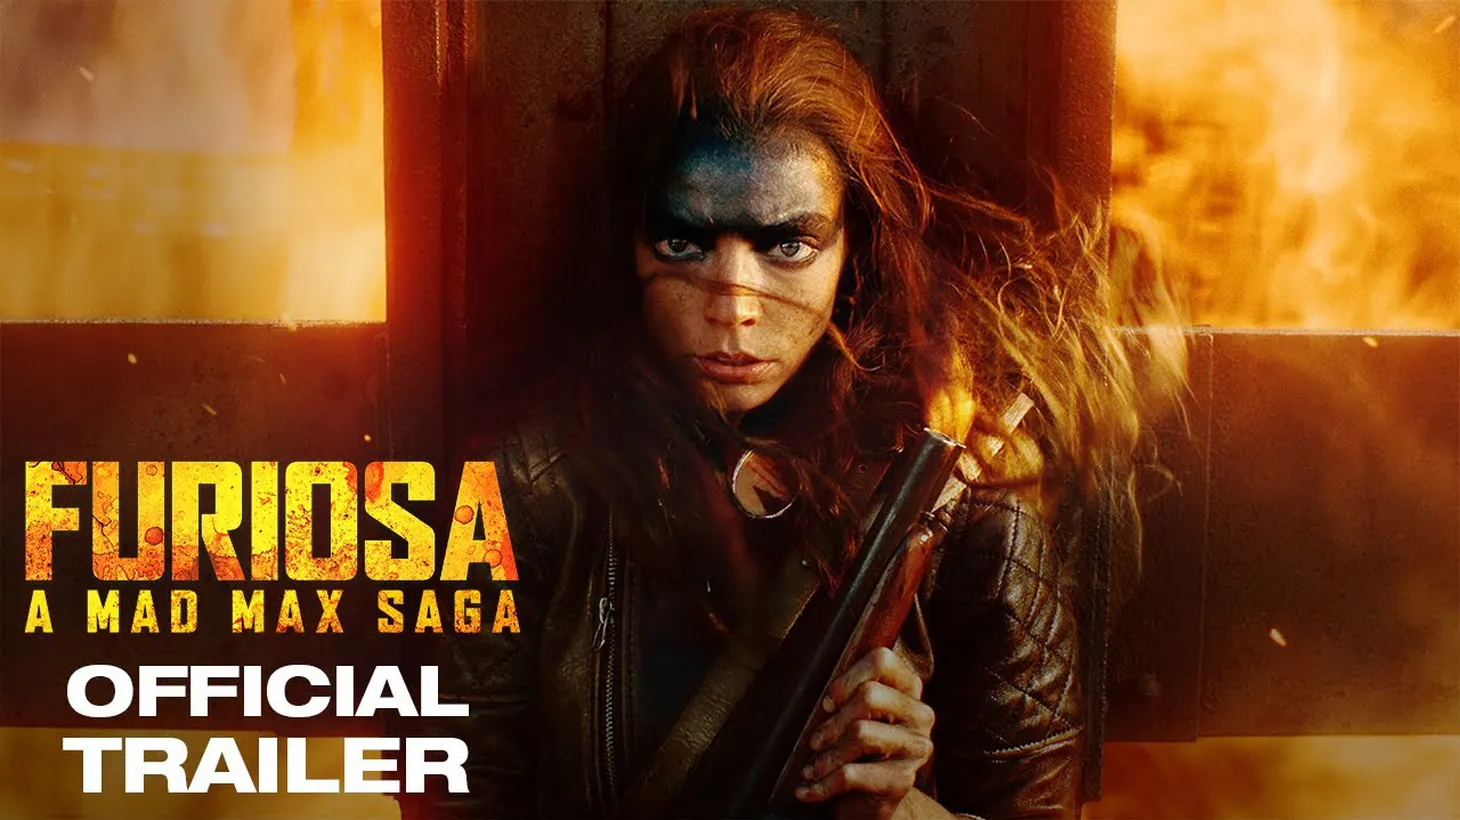 “Furiosa” is the fifth installment of the “Mad Max” franchise, all directed by George Miller.